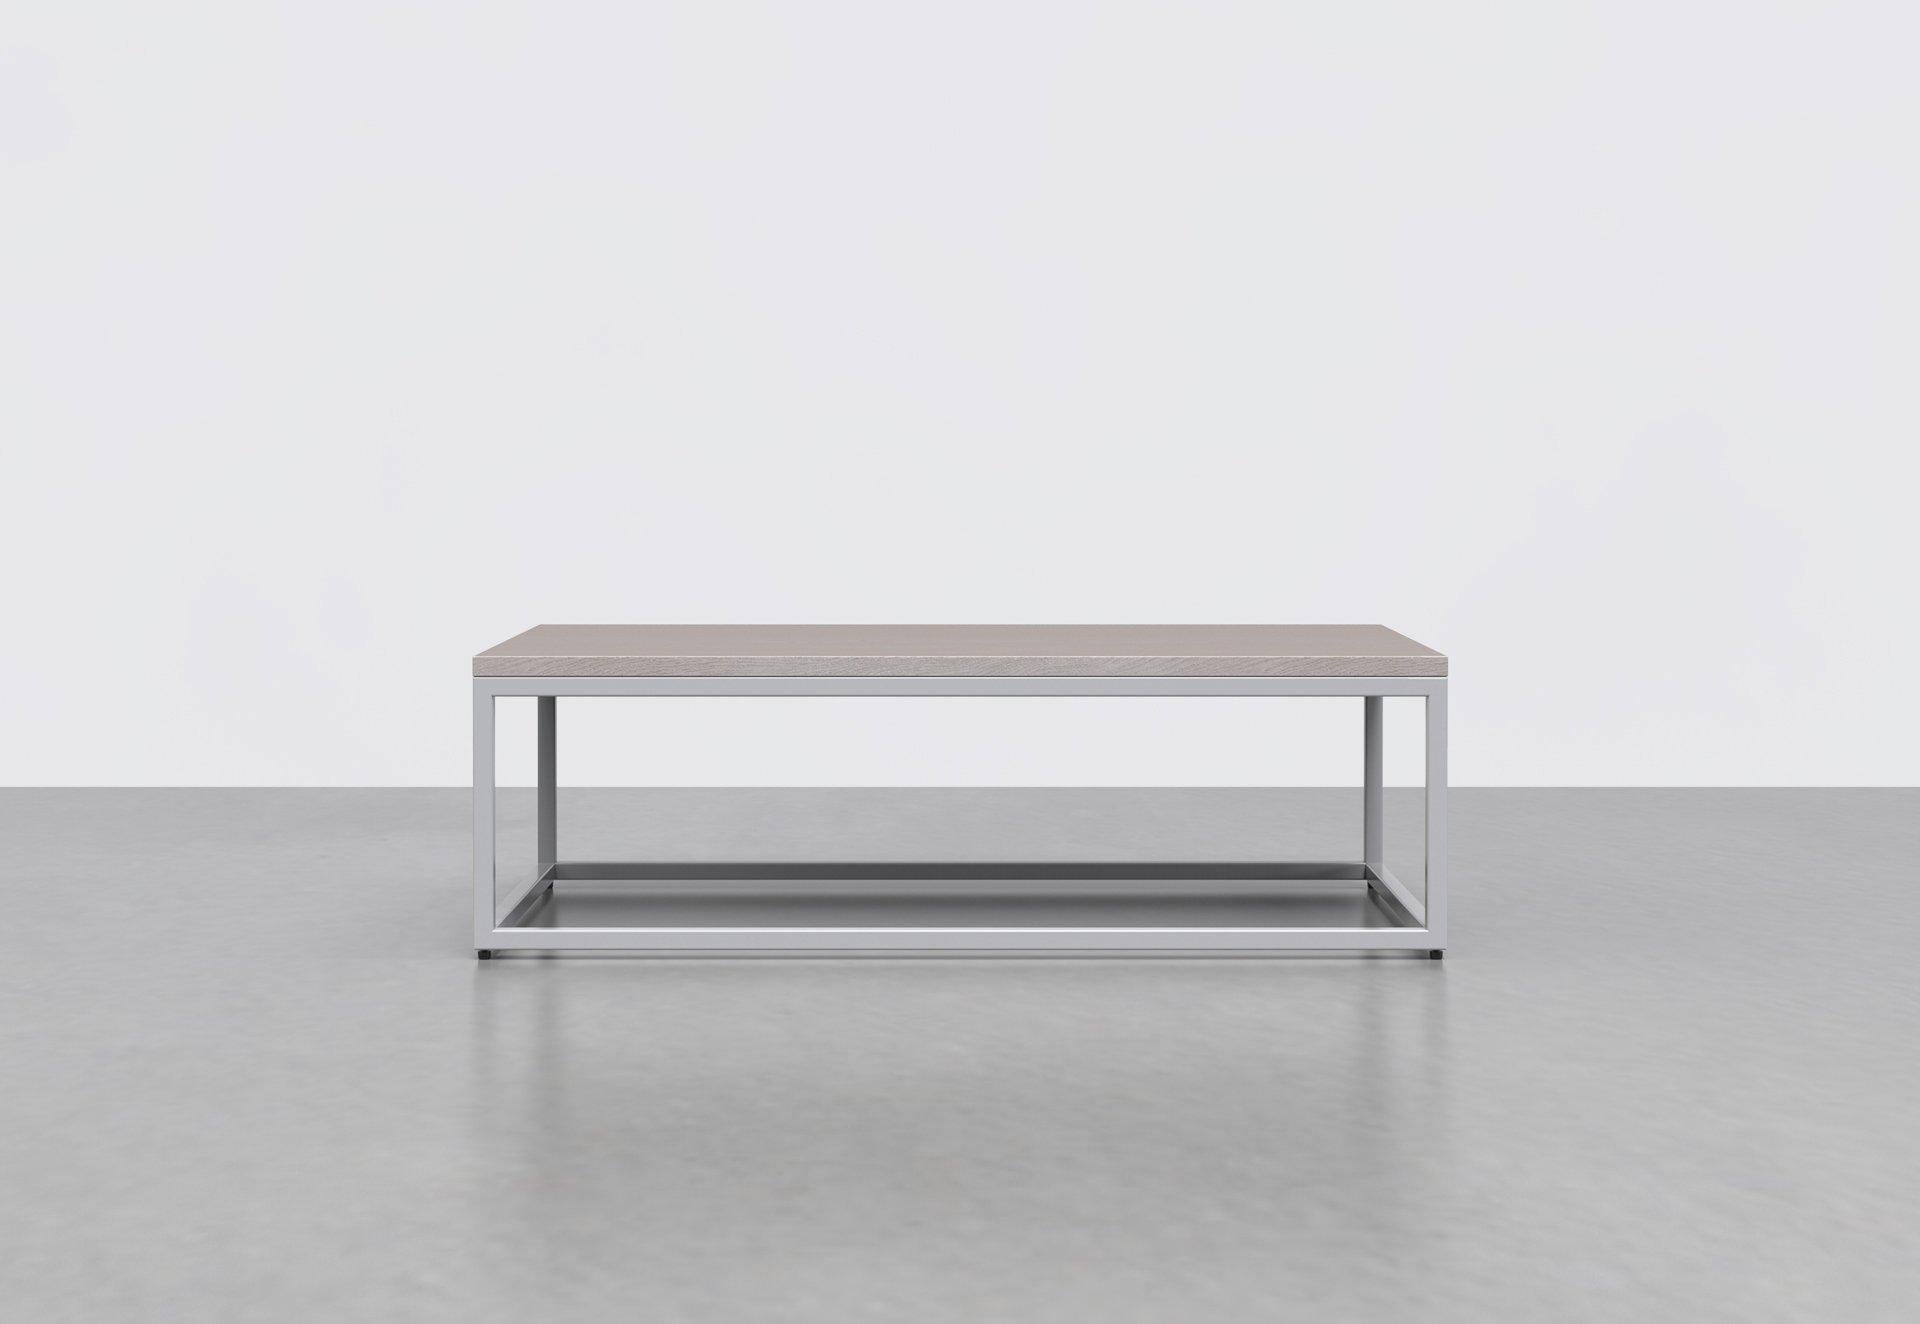 The 1 x 1 coffee table's simple frame allows you to fit it into any space and pairs well with any interior style. Great in any living room or lobby area. 